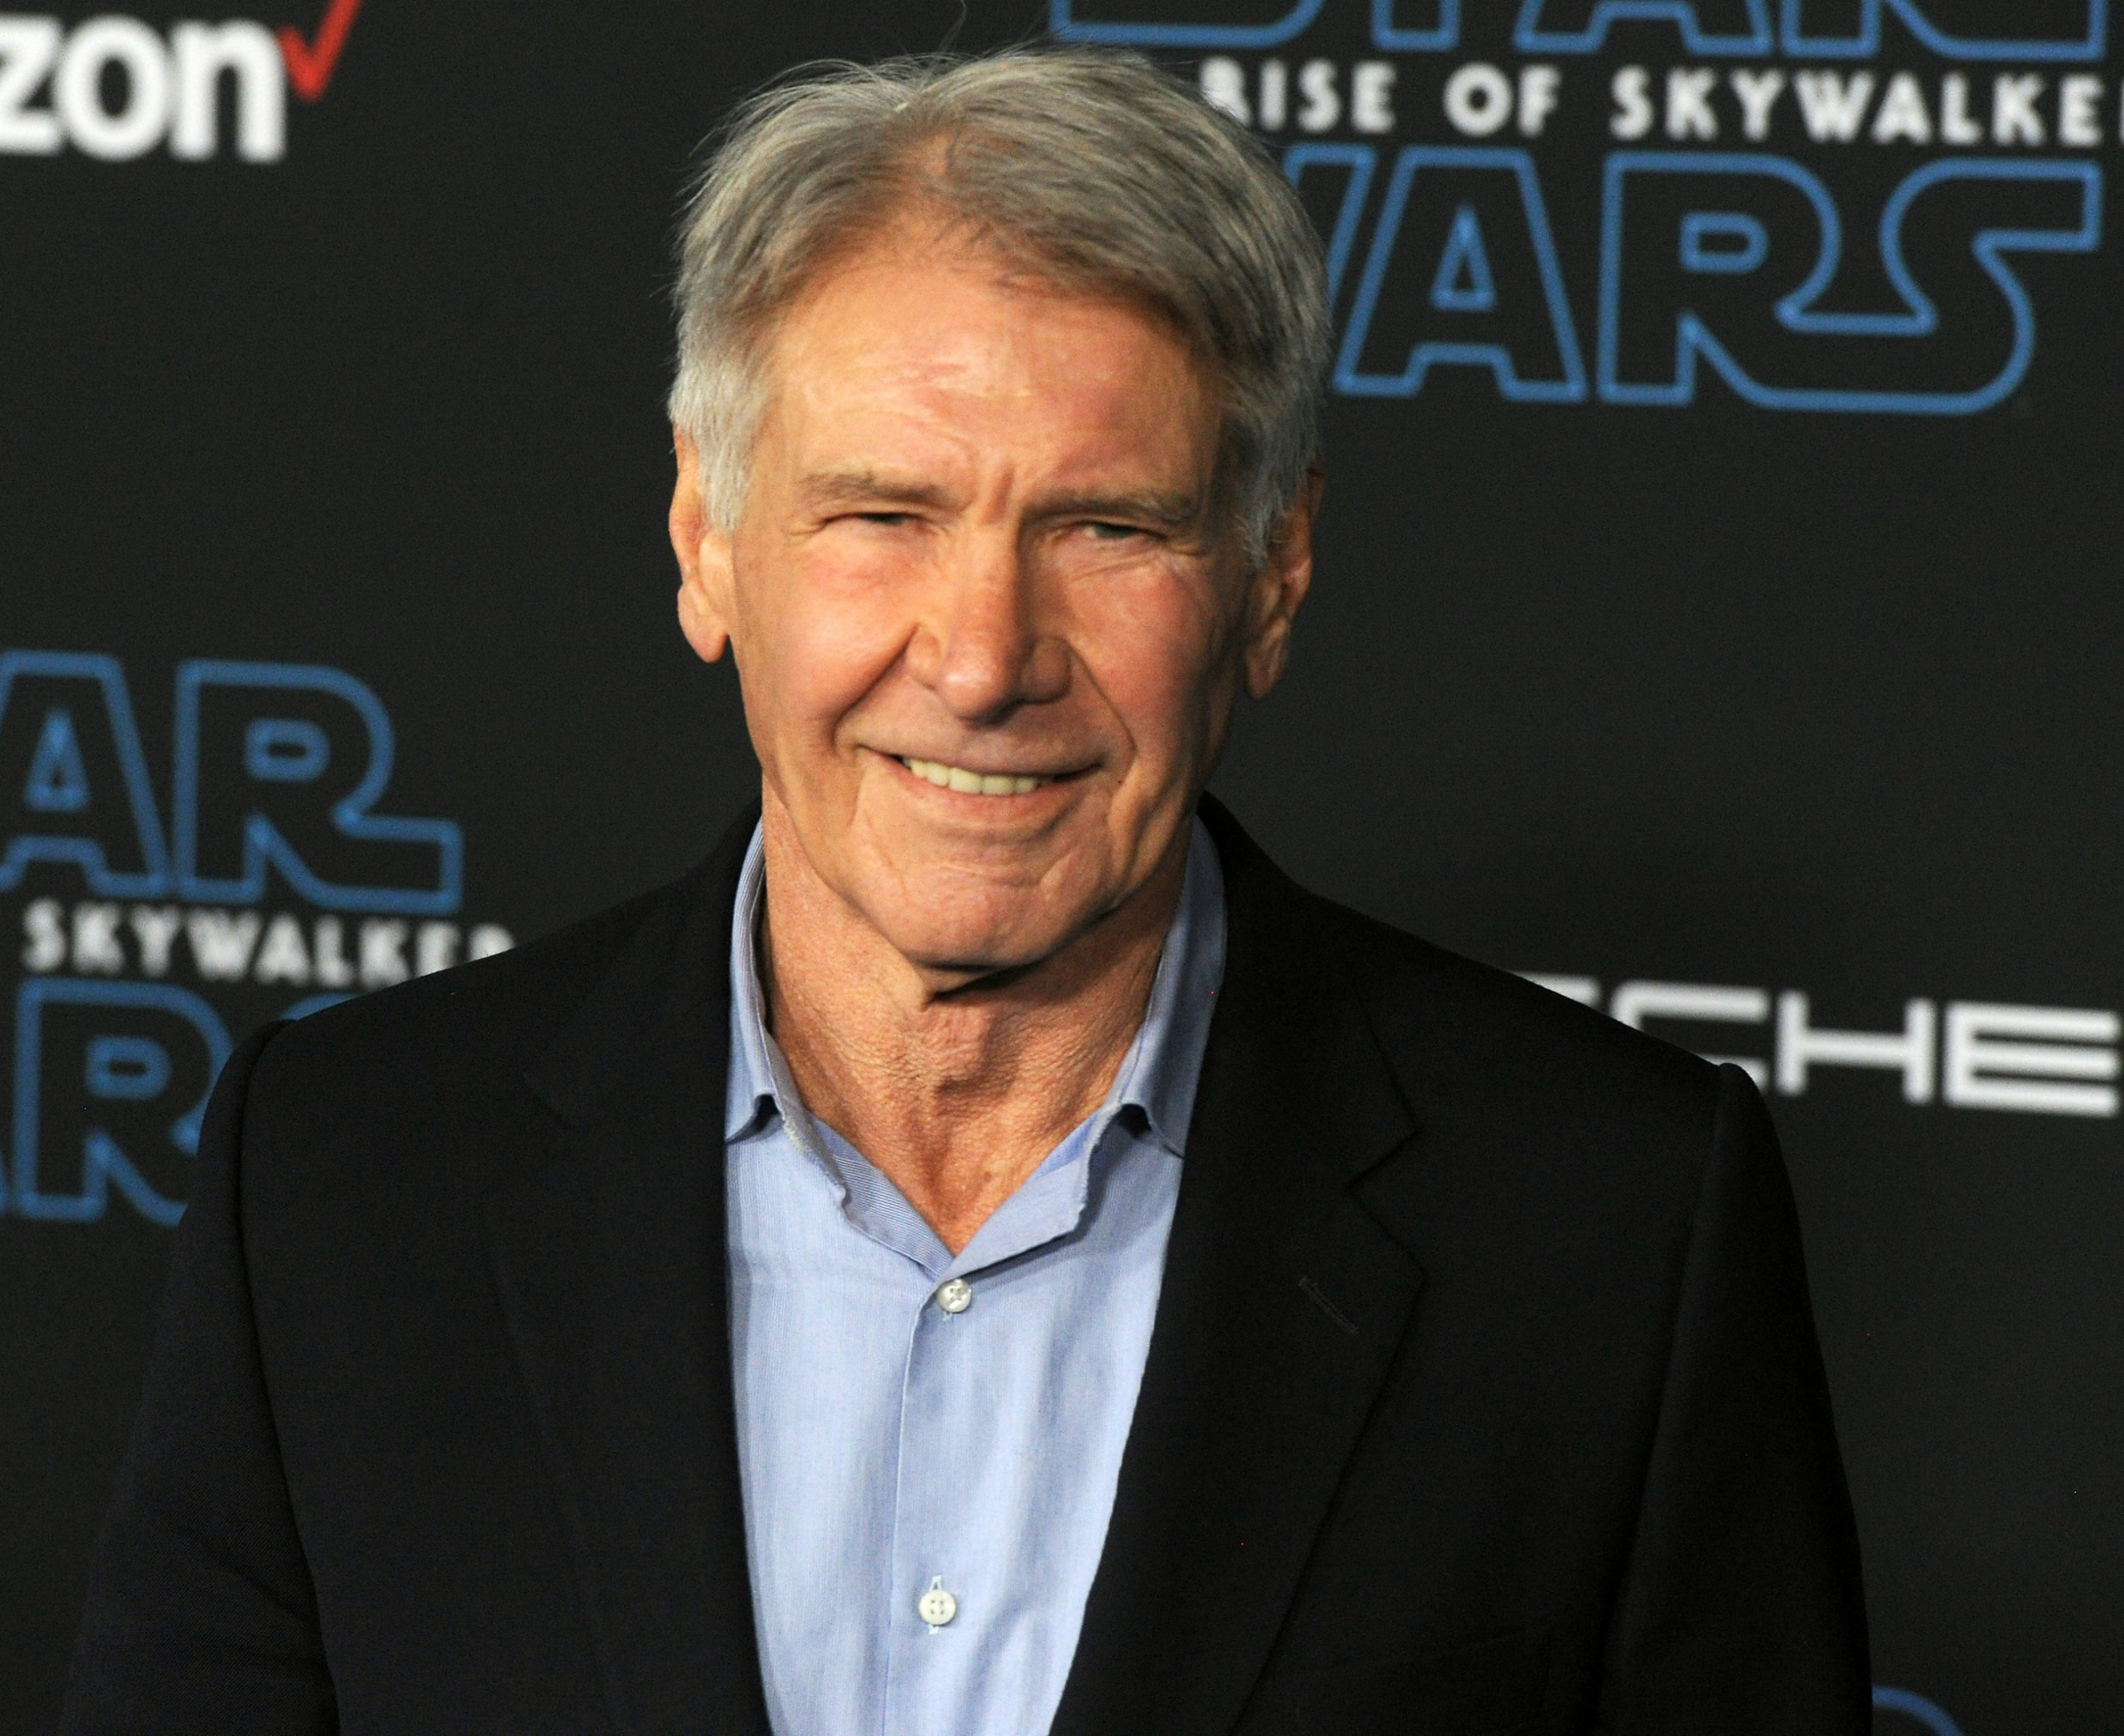 Star Wars actor Harrison Ford in photos Then and now